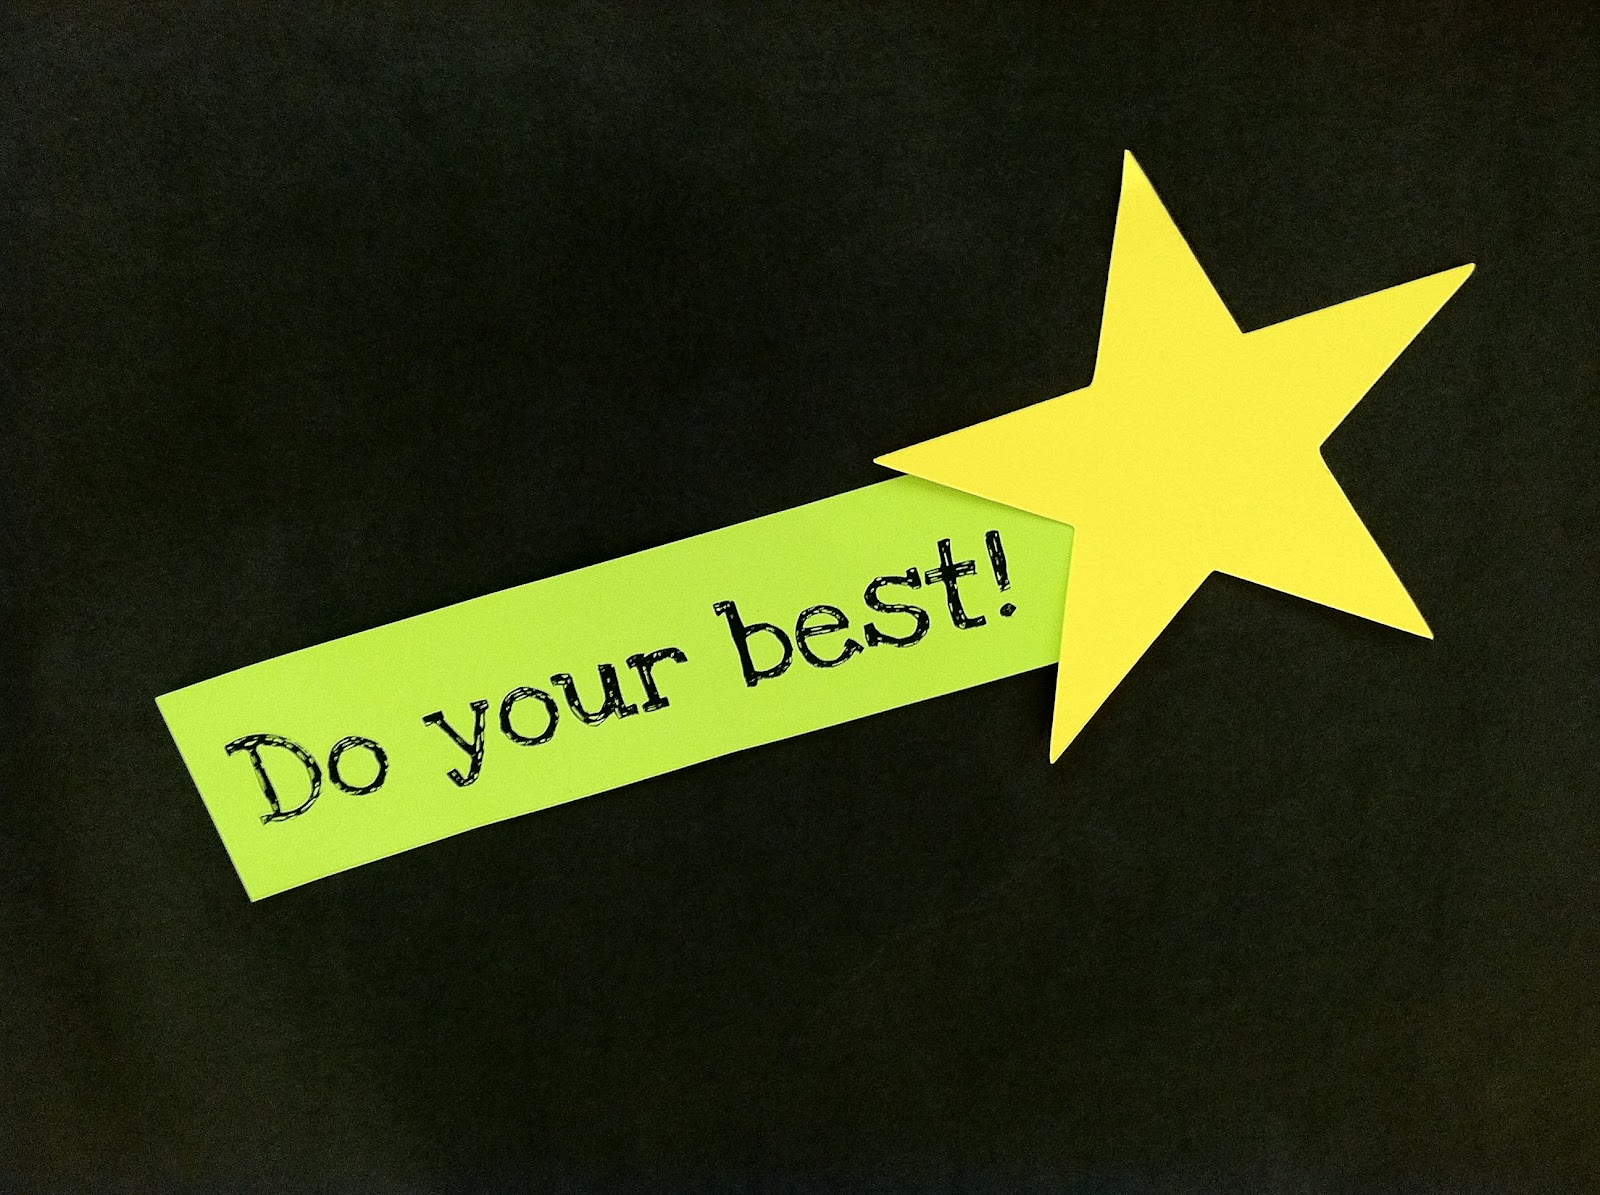 Always do your best. Do your best. Your the best. Do your best PNG.